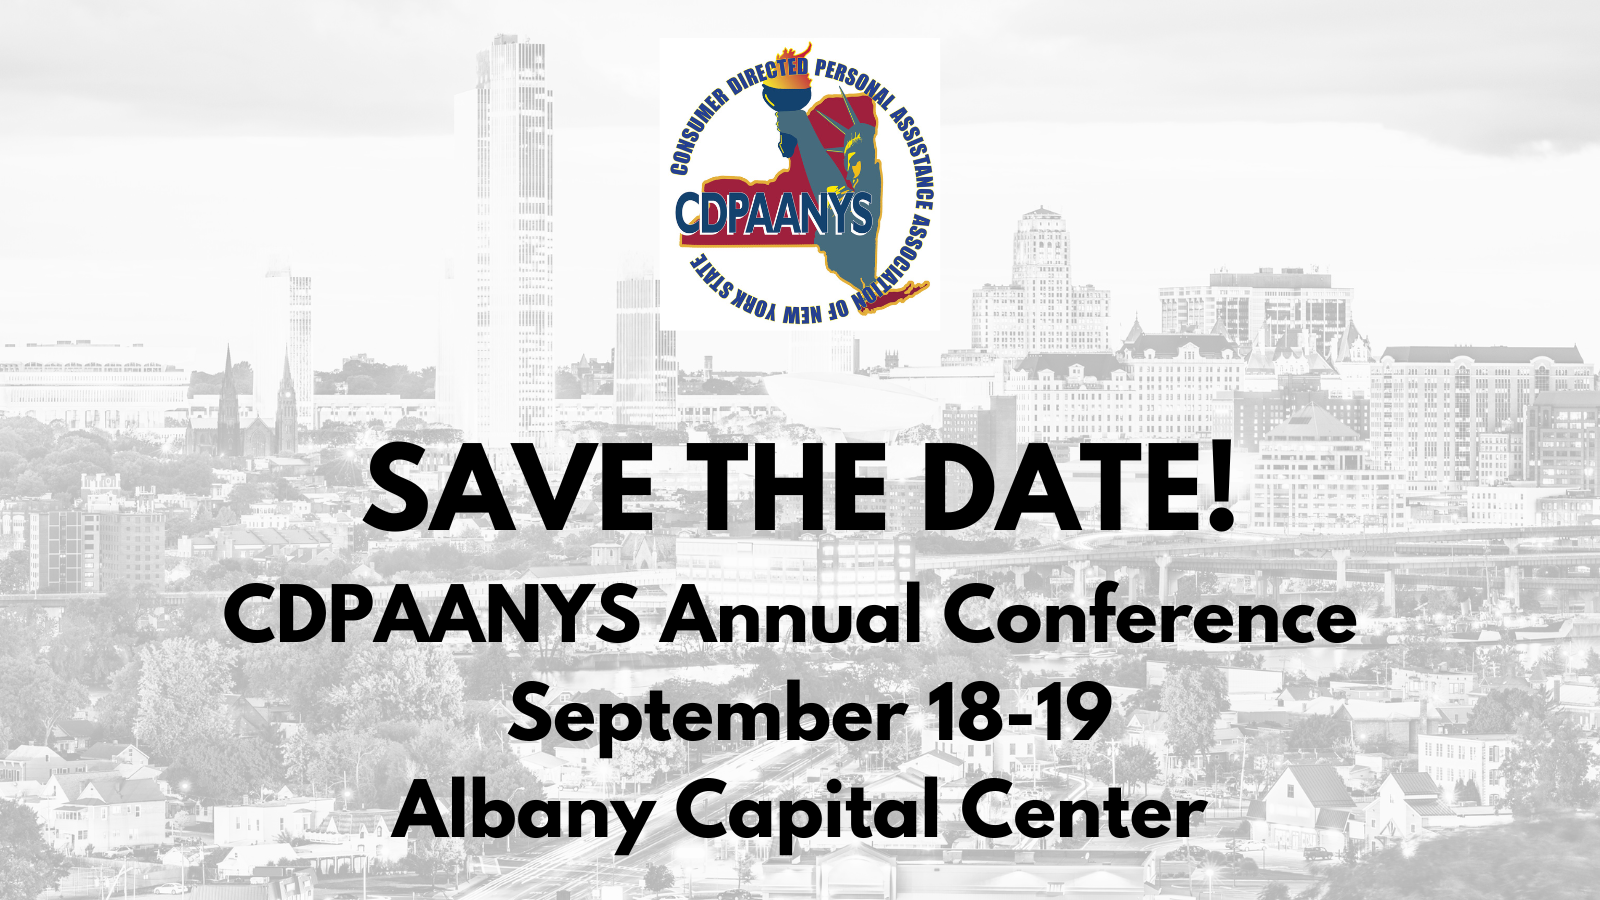 SAVE THE DATE!
CDPAANYS Annual Conference 
 September 18-19
Albany Capital Center